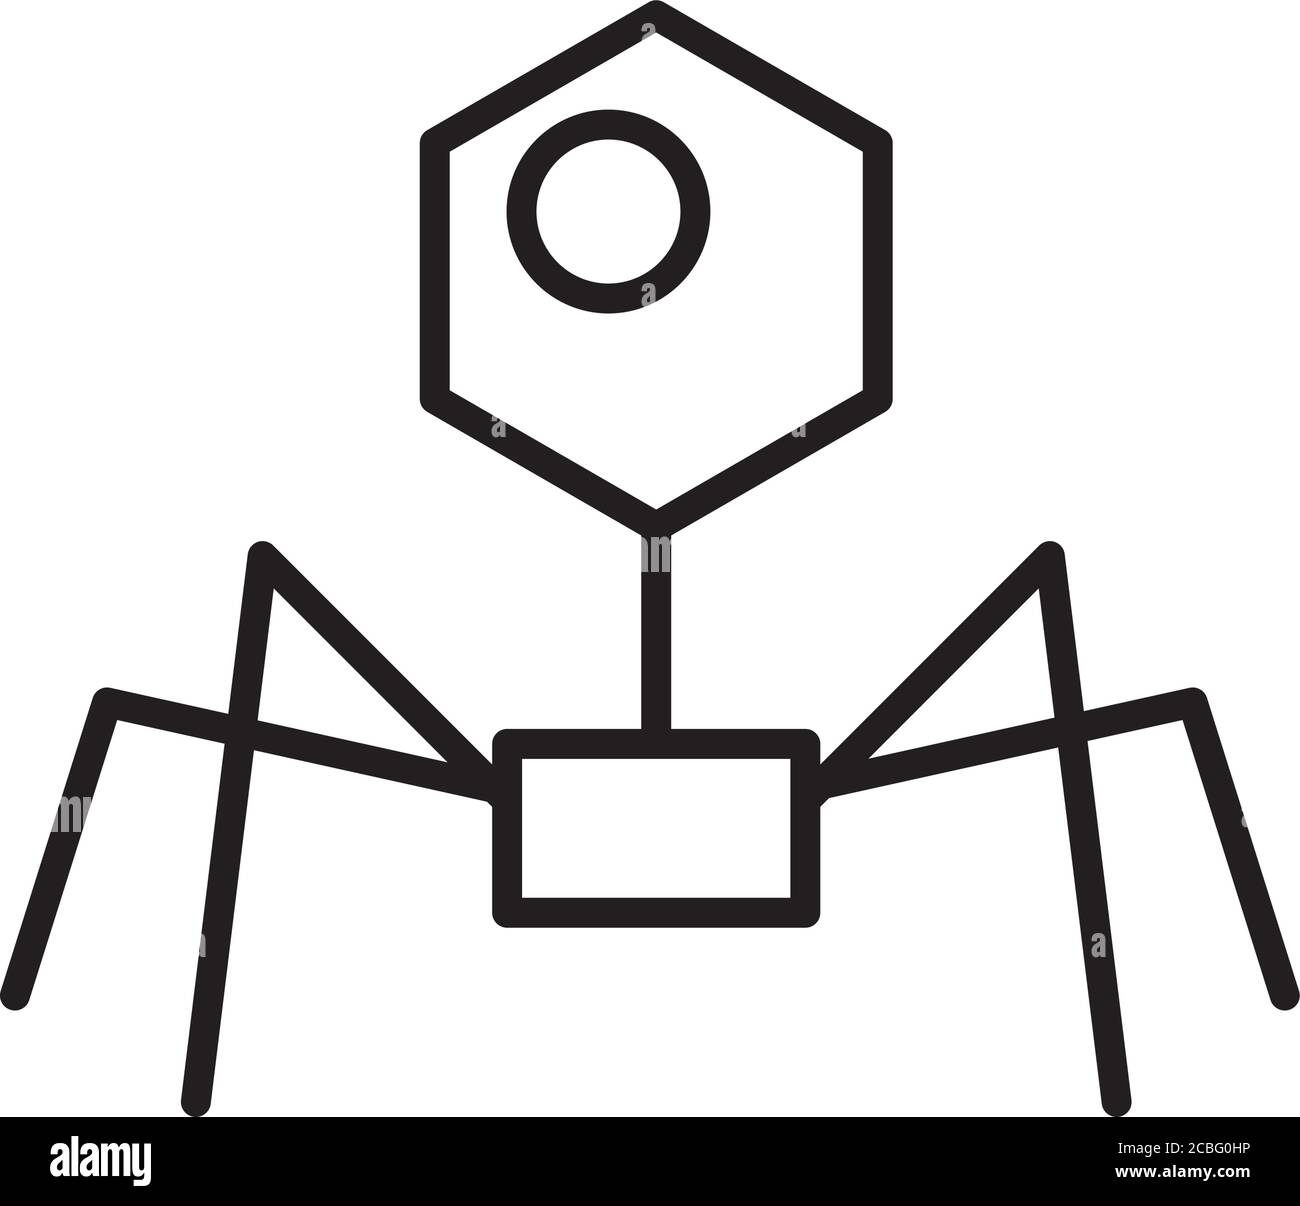 bacteriophage shape icon over white background, line style, vector illustration Stock Vector